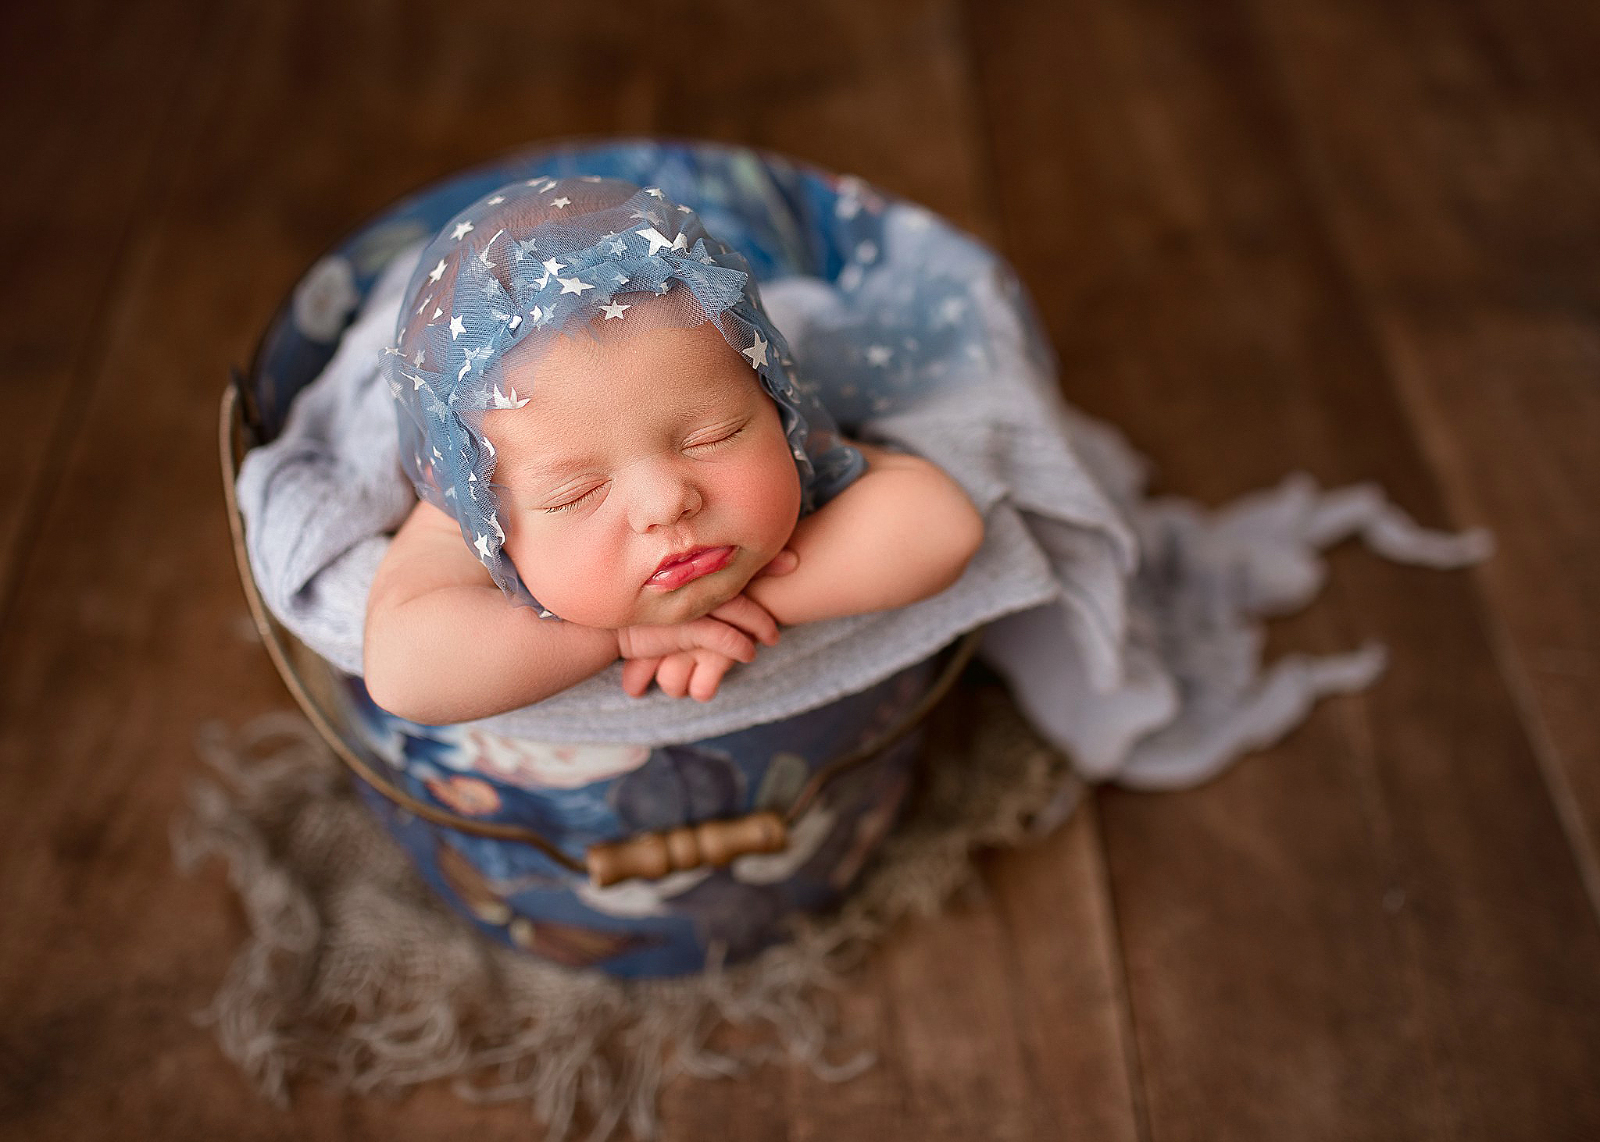 Newborn baby girl sleeping peacefully, wearing a blue bonnet with stars on, photographed in a blue floral bucket